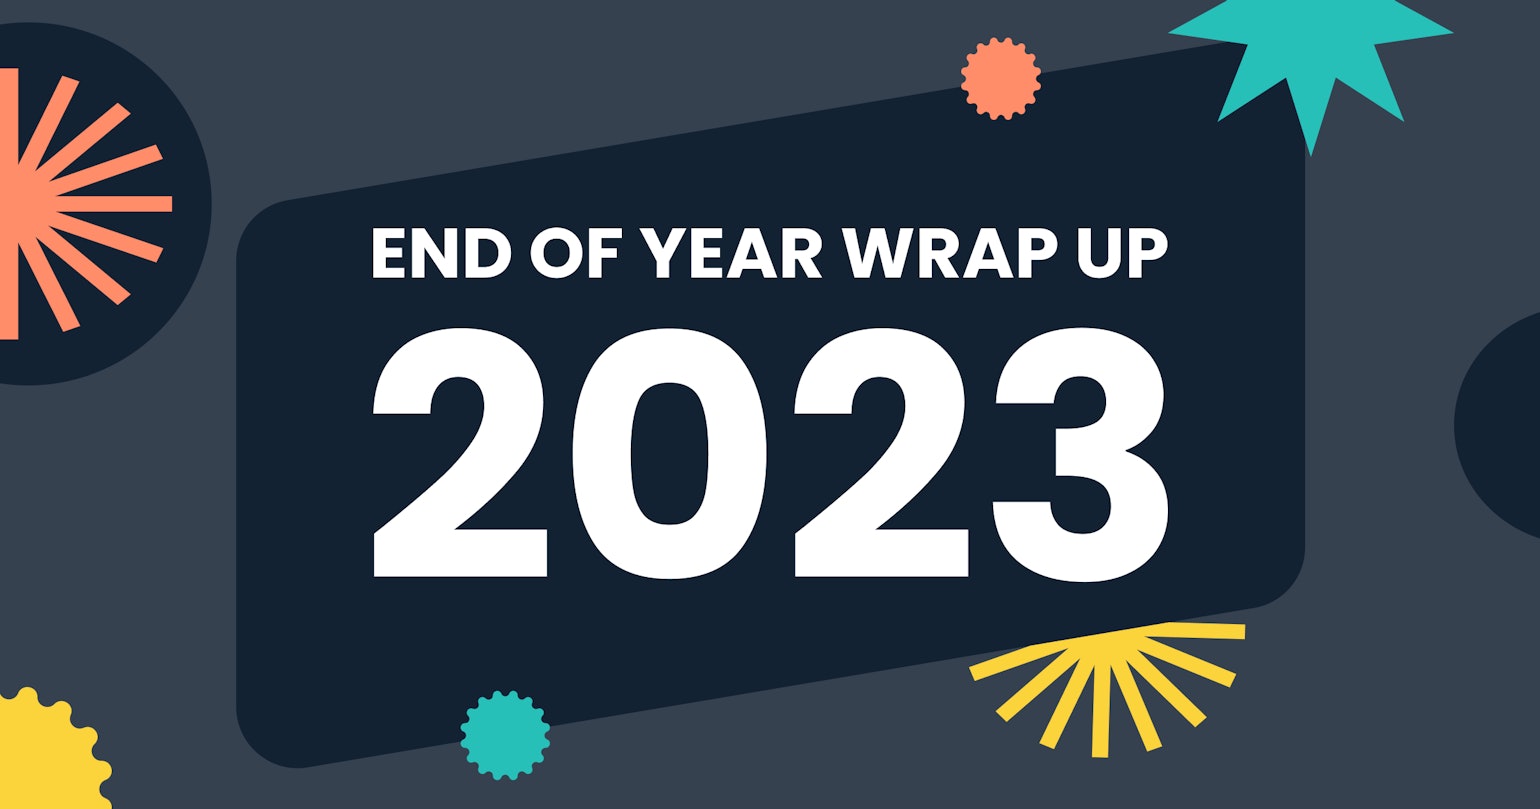 PayAnalytics end of year wrap up - 2023